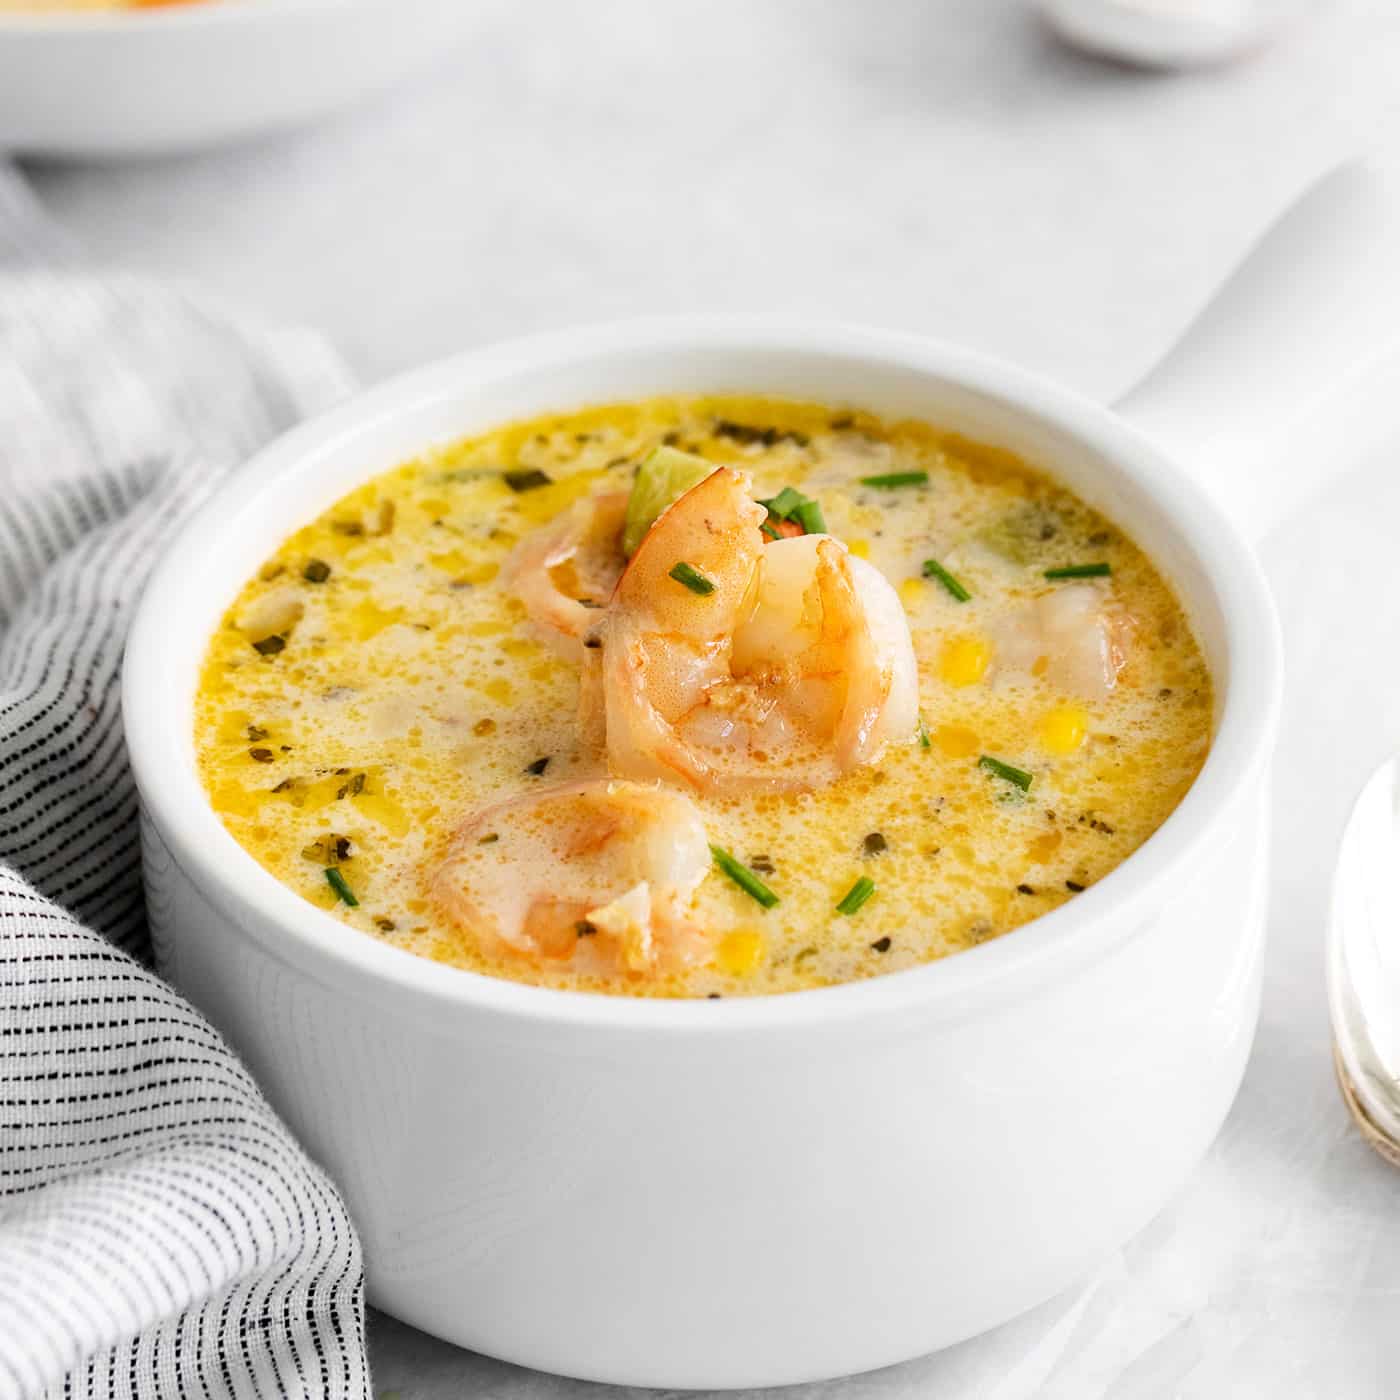 Angled view of a bowl of shrimp and corn chowder